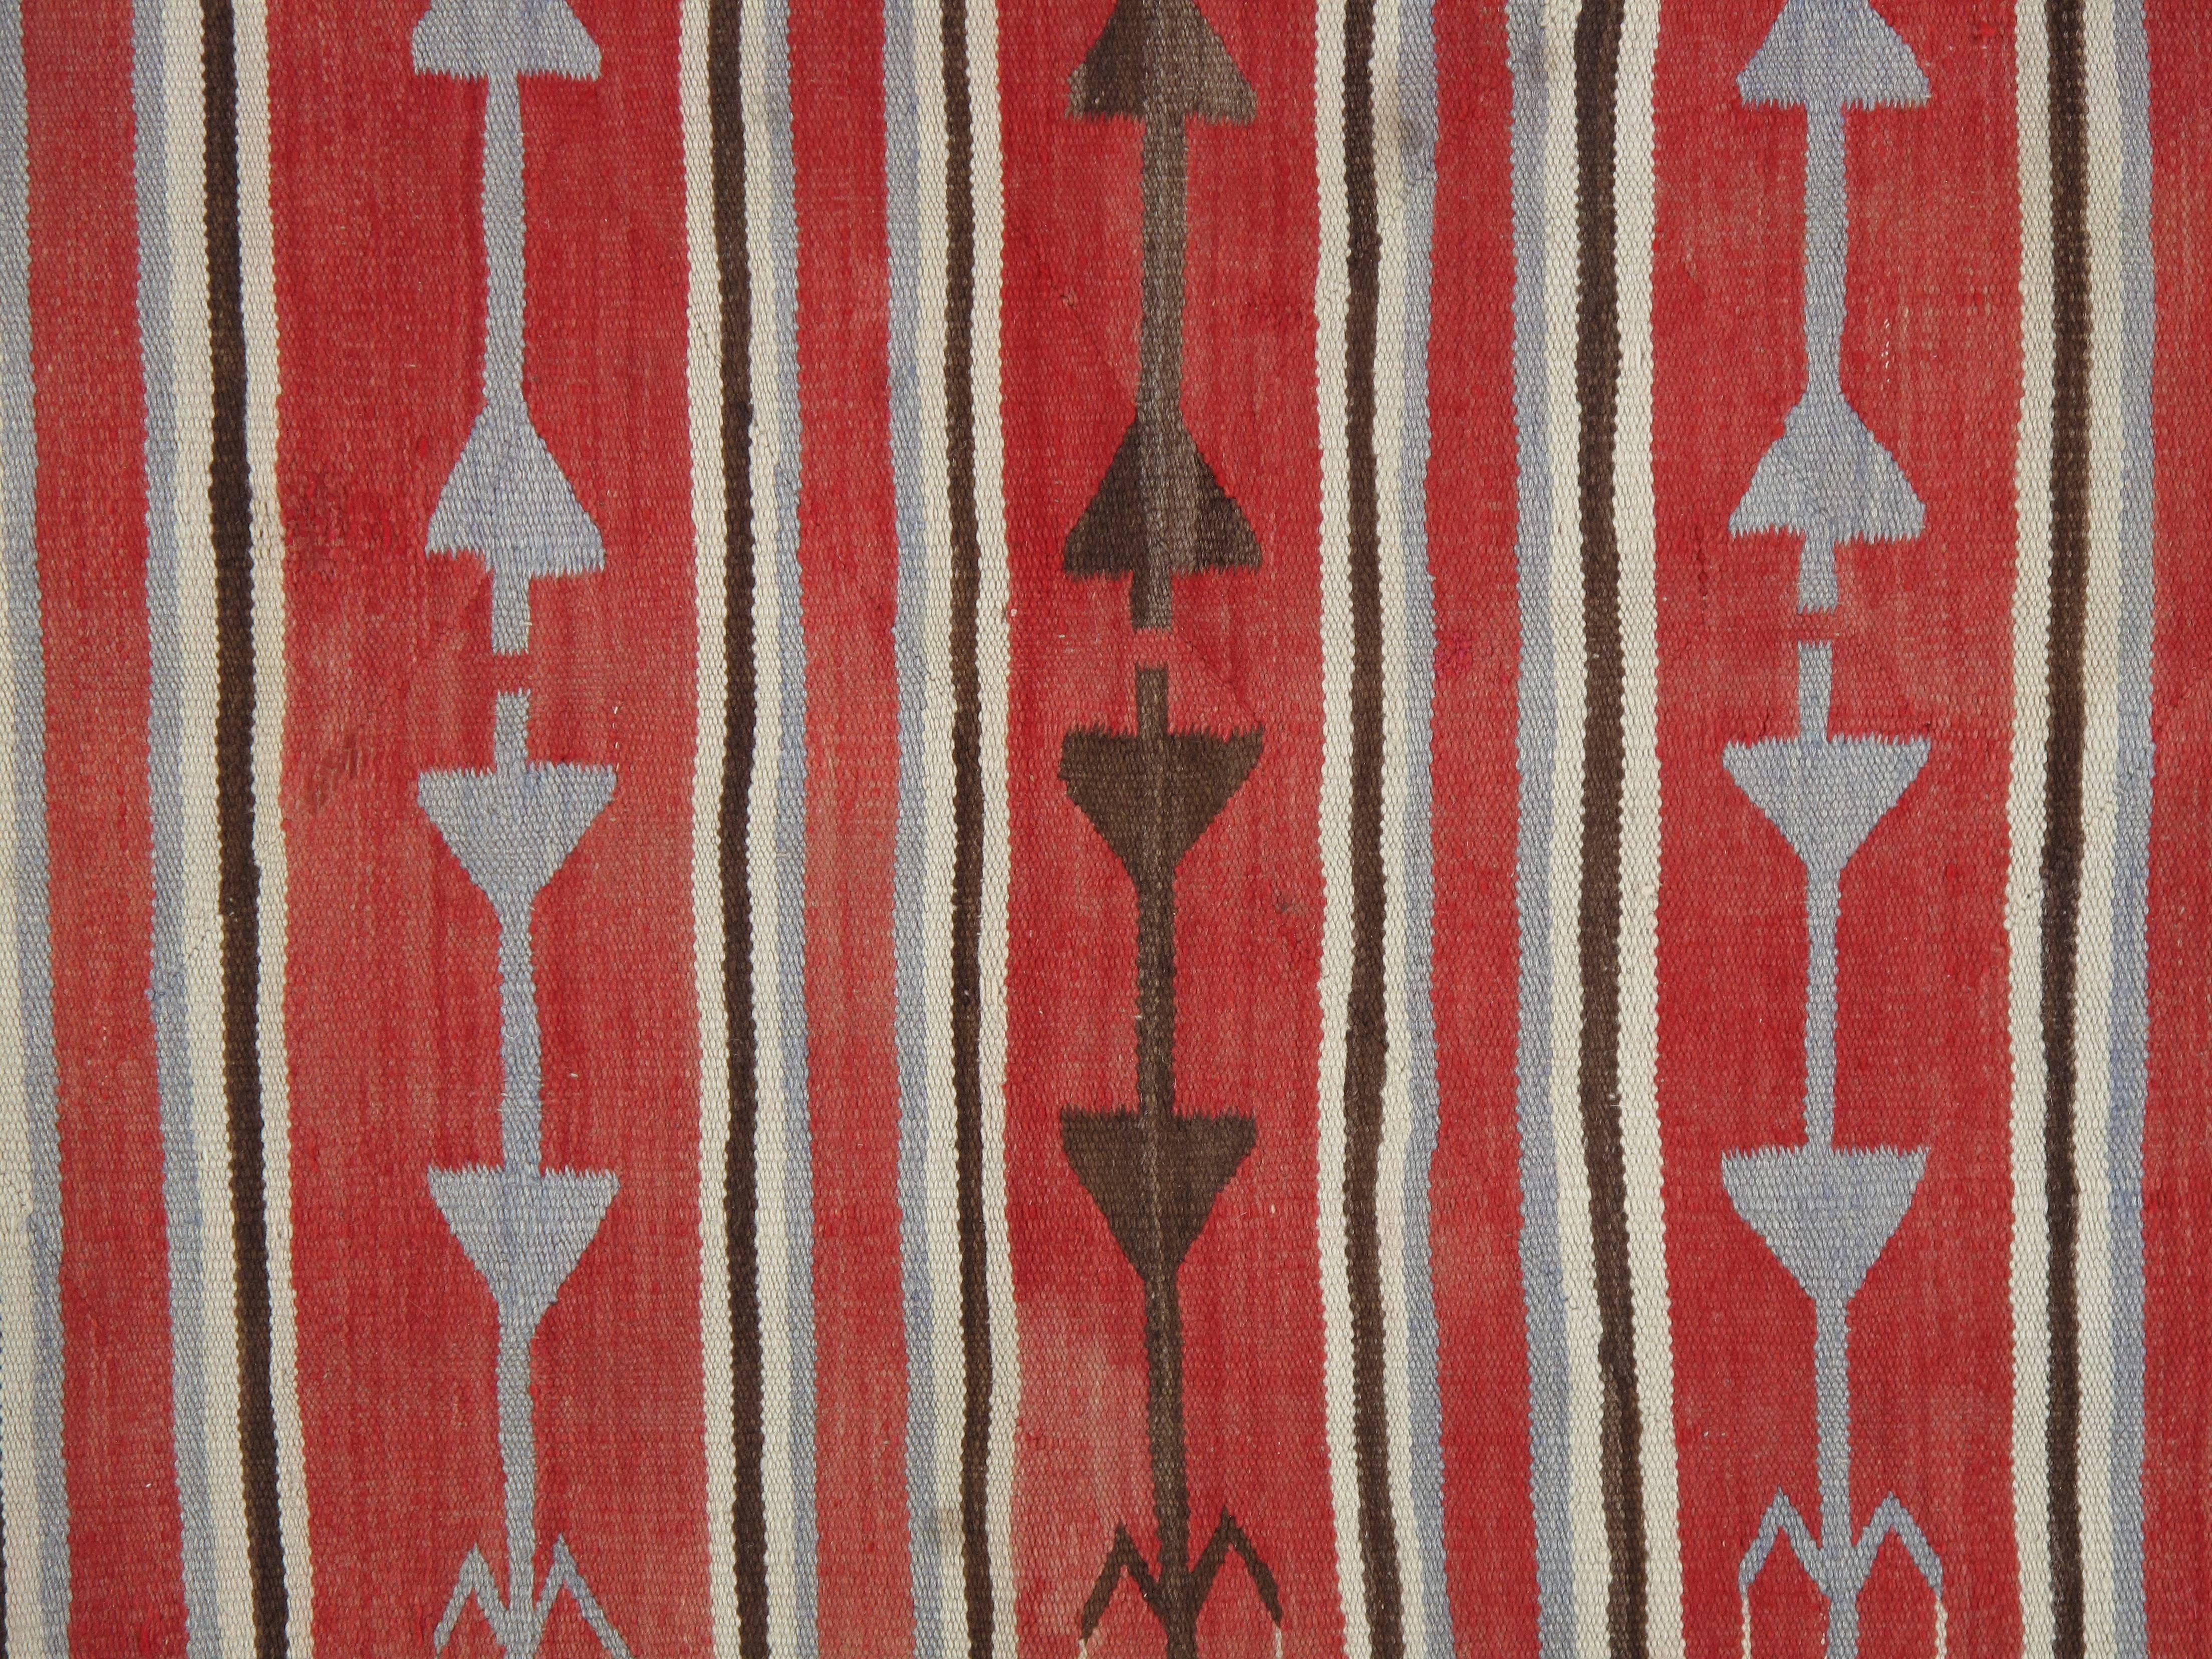 Navajo rugs and blankets are textiles produced by Navajo people of the Four Corners area of the United States. Navajo textiles are highly regarded and have been sought after as trade items for over 150 years. These rugs and blankets are prized by